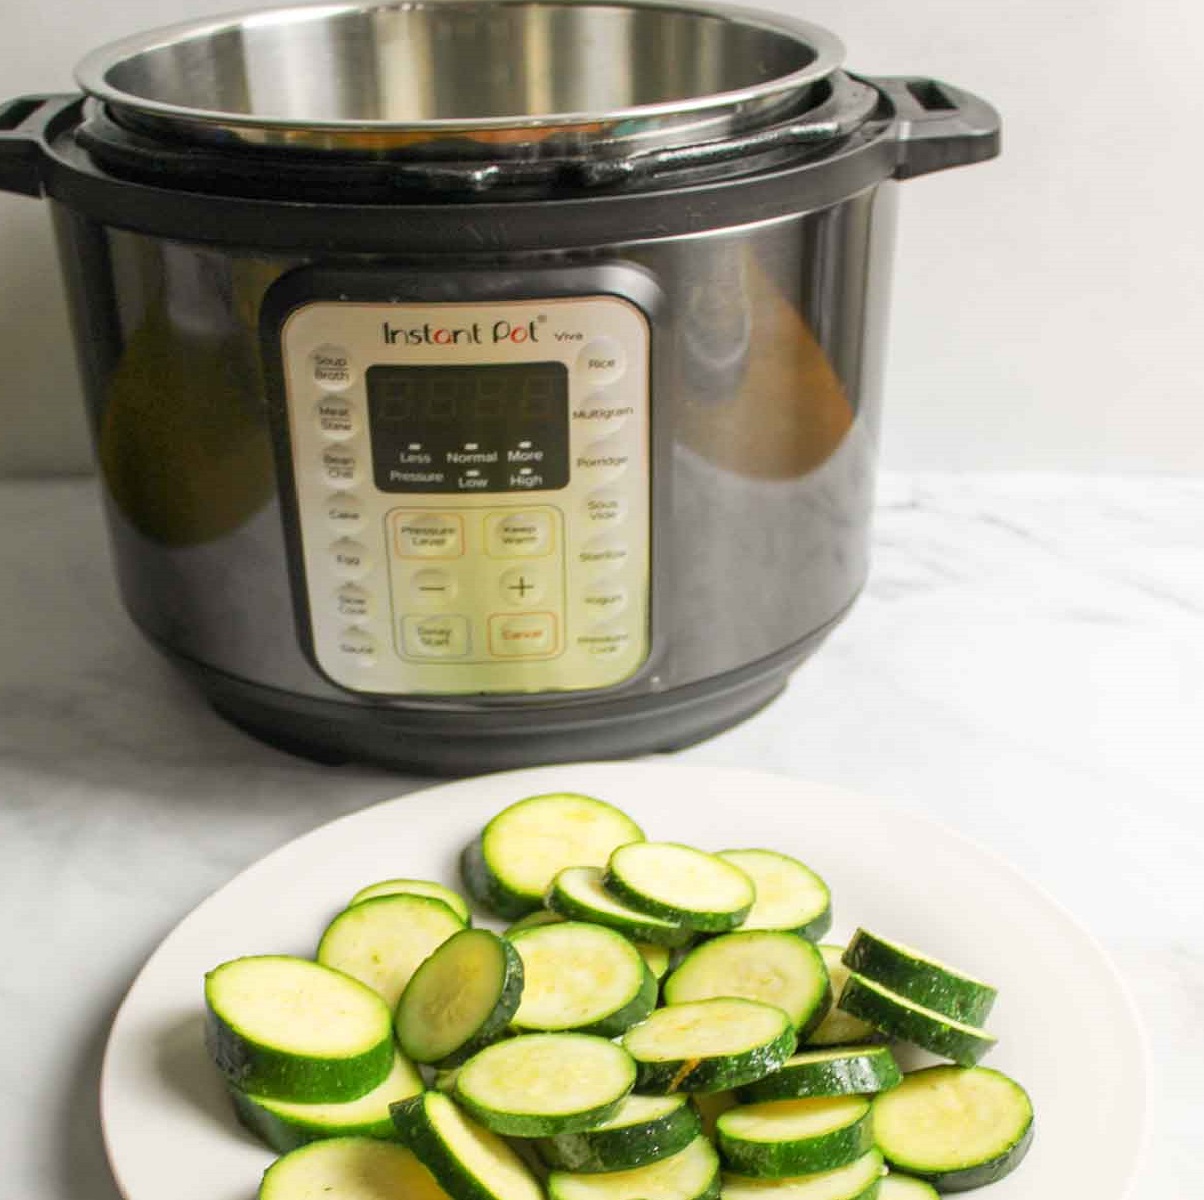 When To Add Zucchini To Slow Cooker